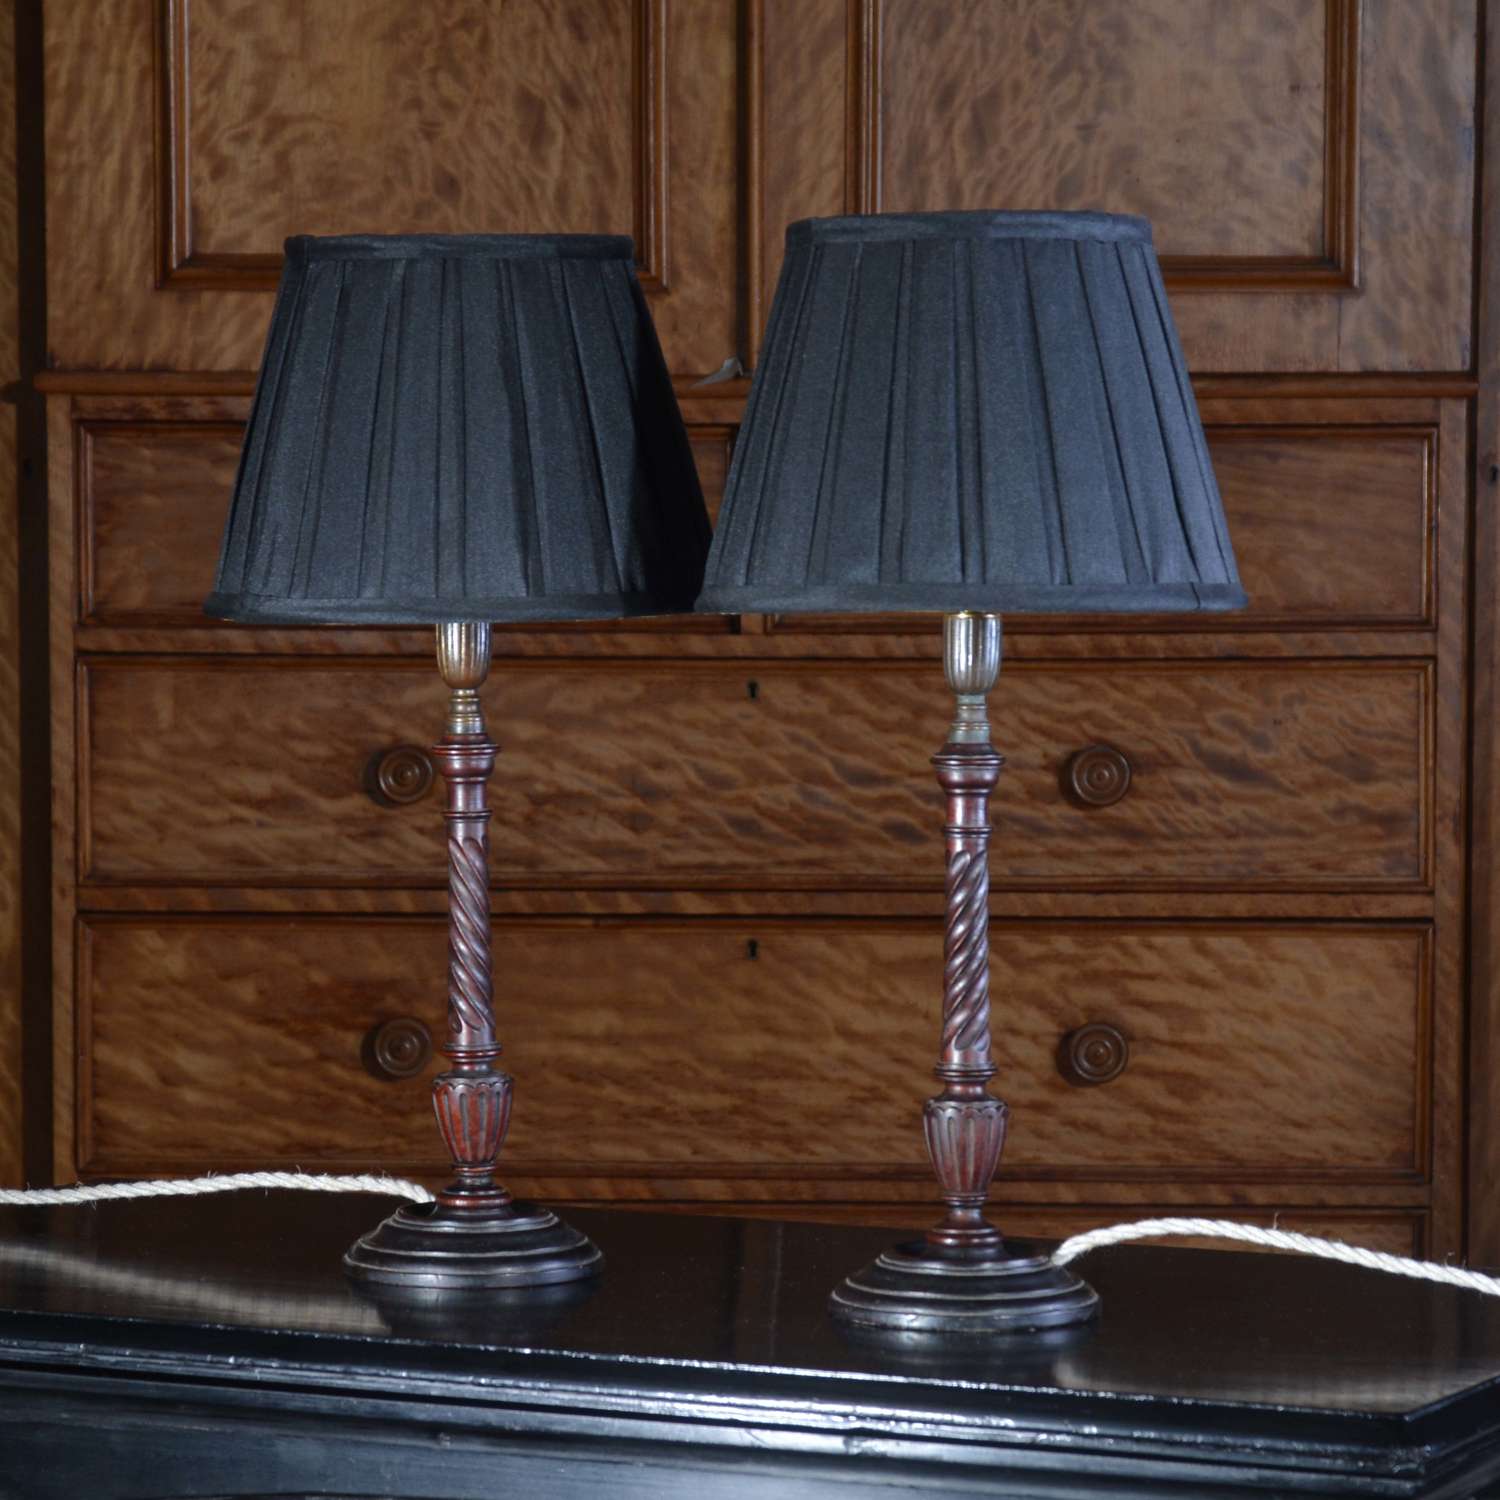 Pair of 18th Century Candlestick Lamps